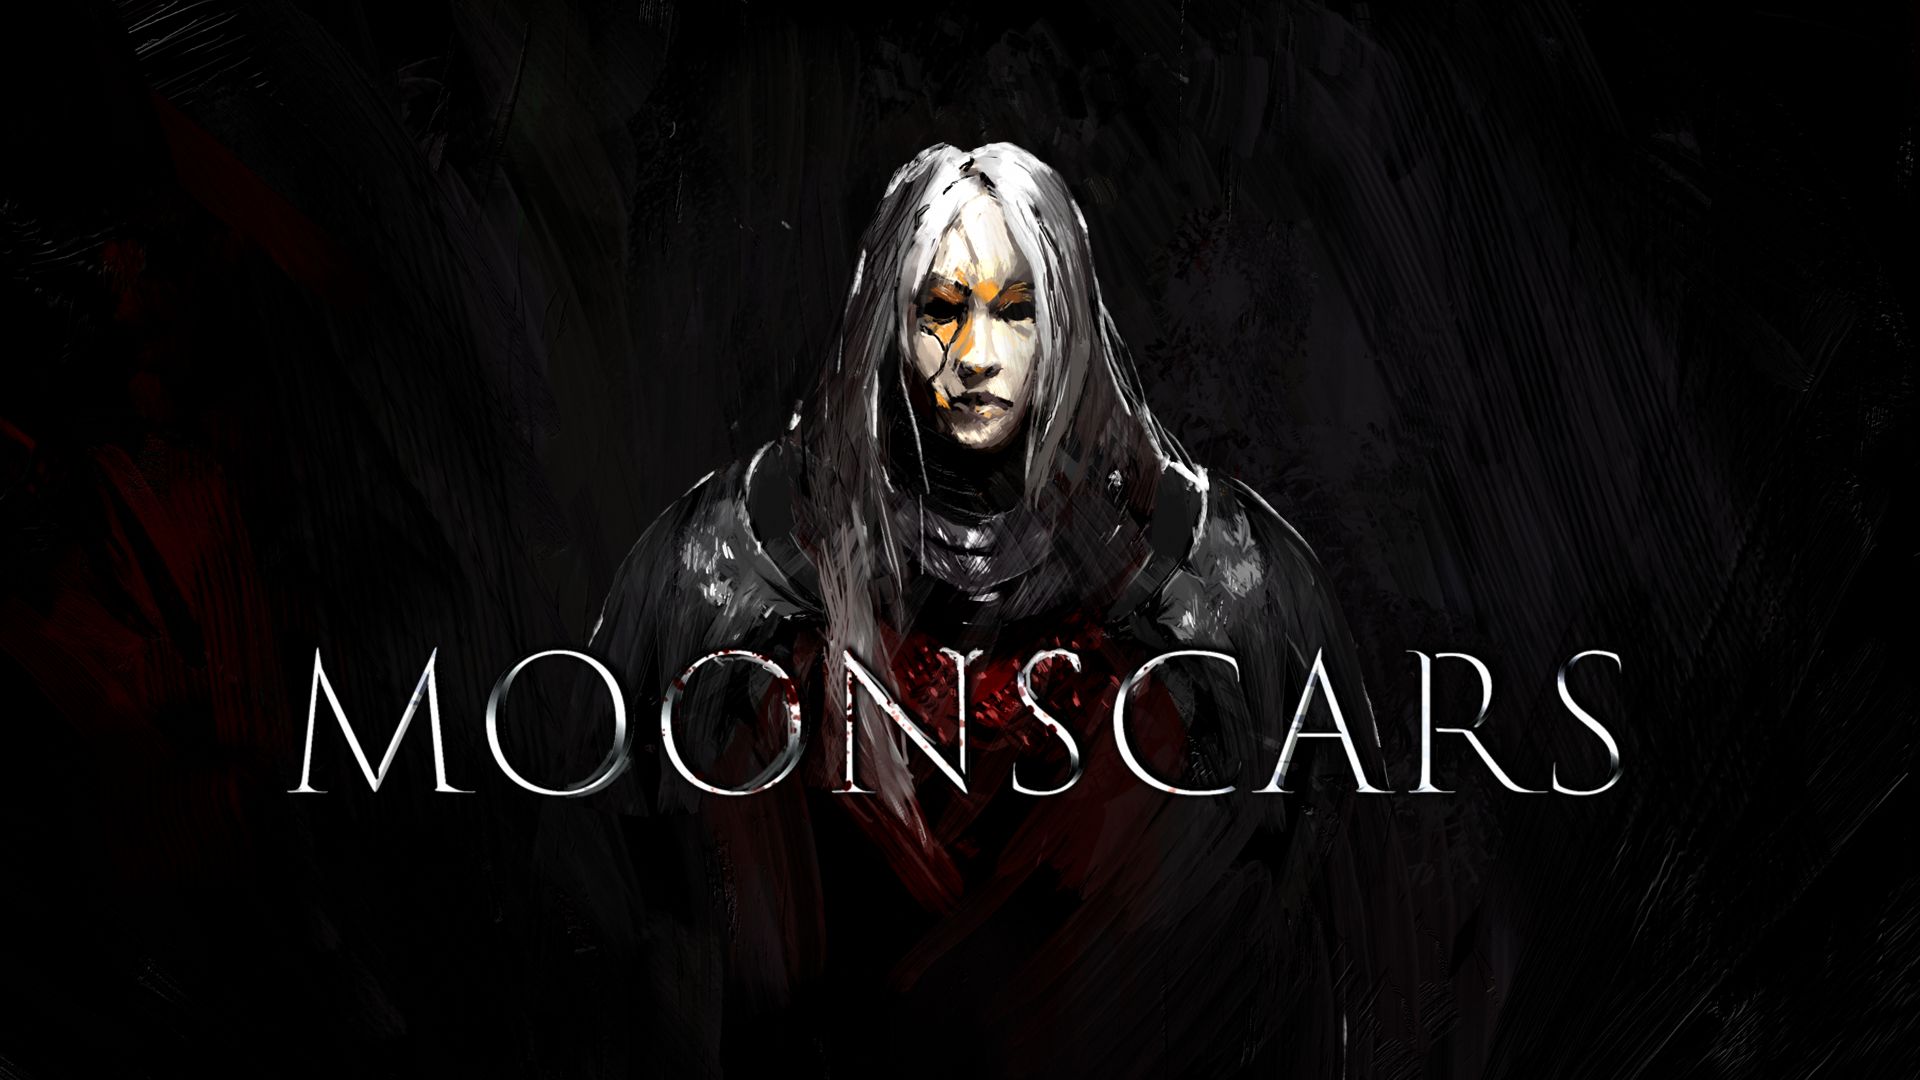 Video For It’s Time to Meet Your Maker! Moonscars is Now Available